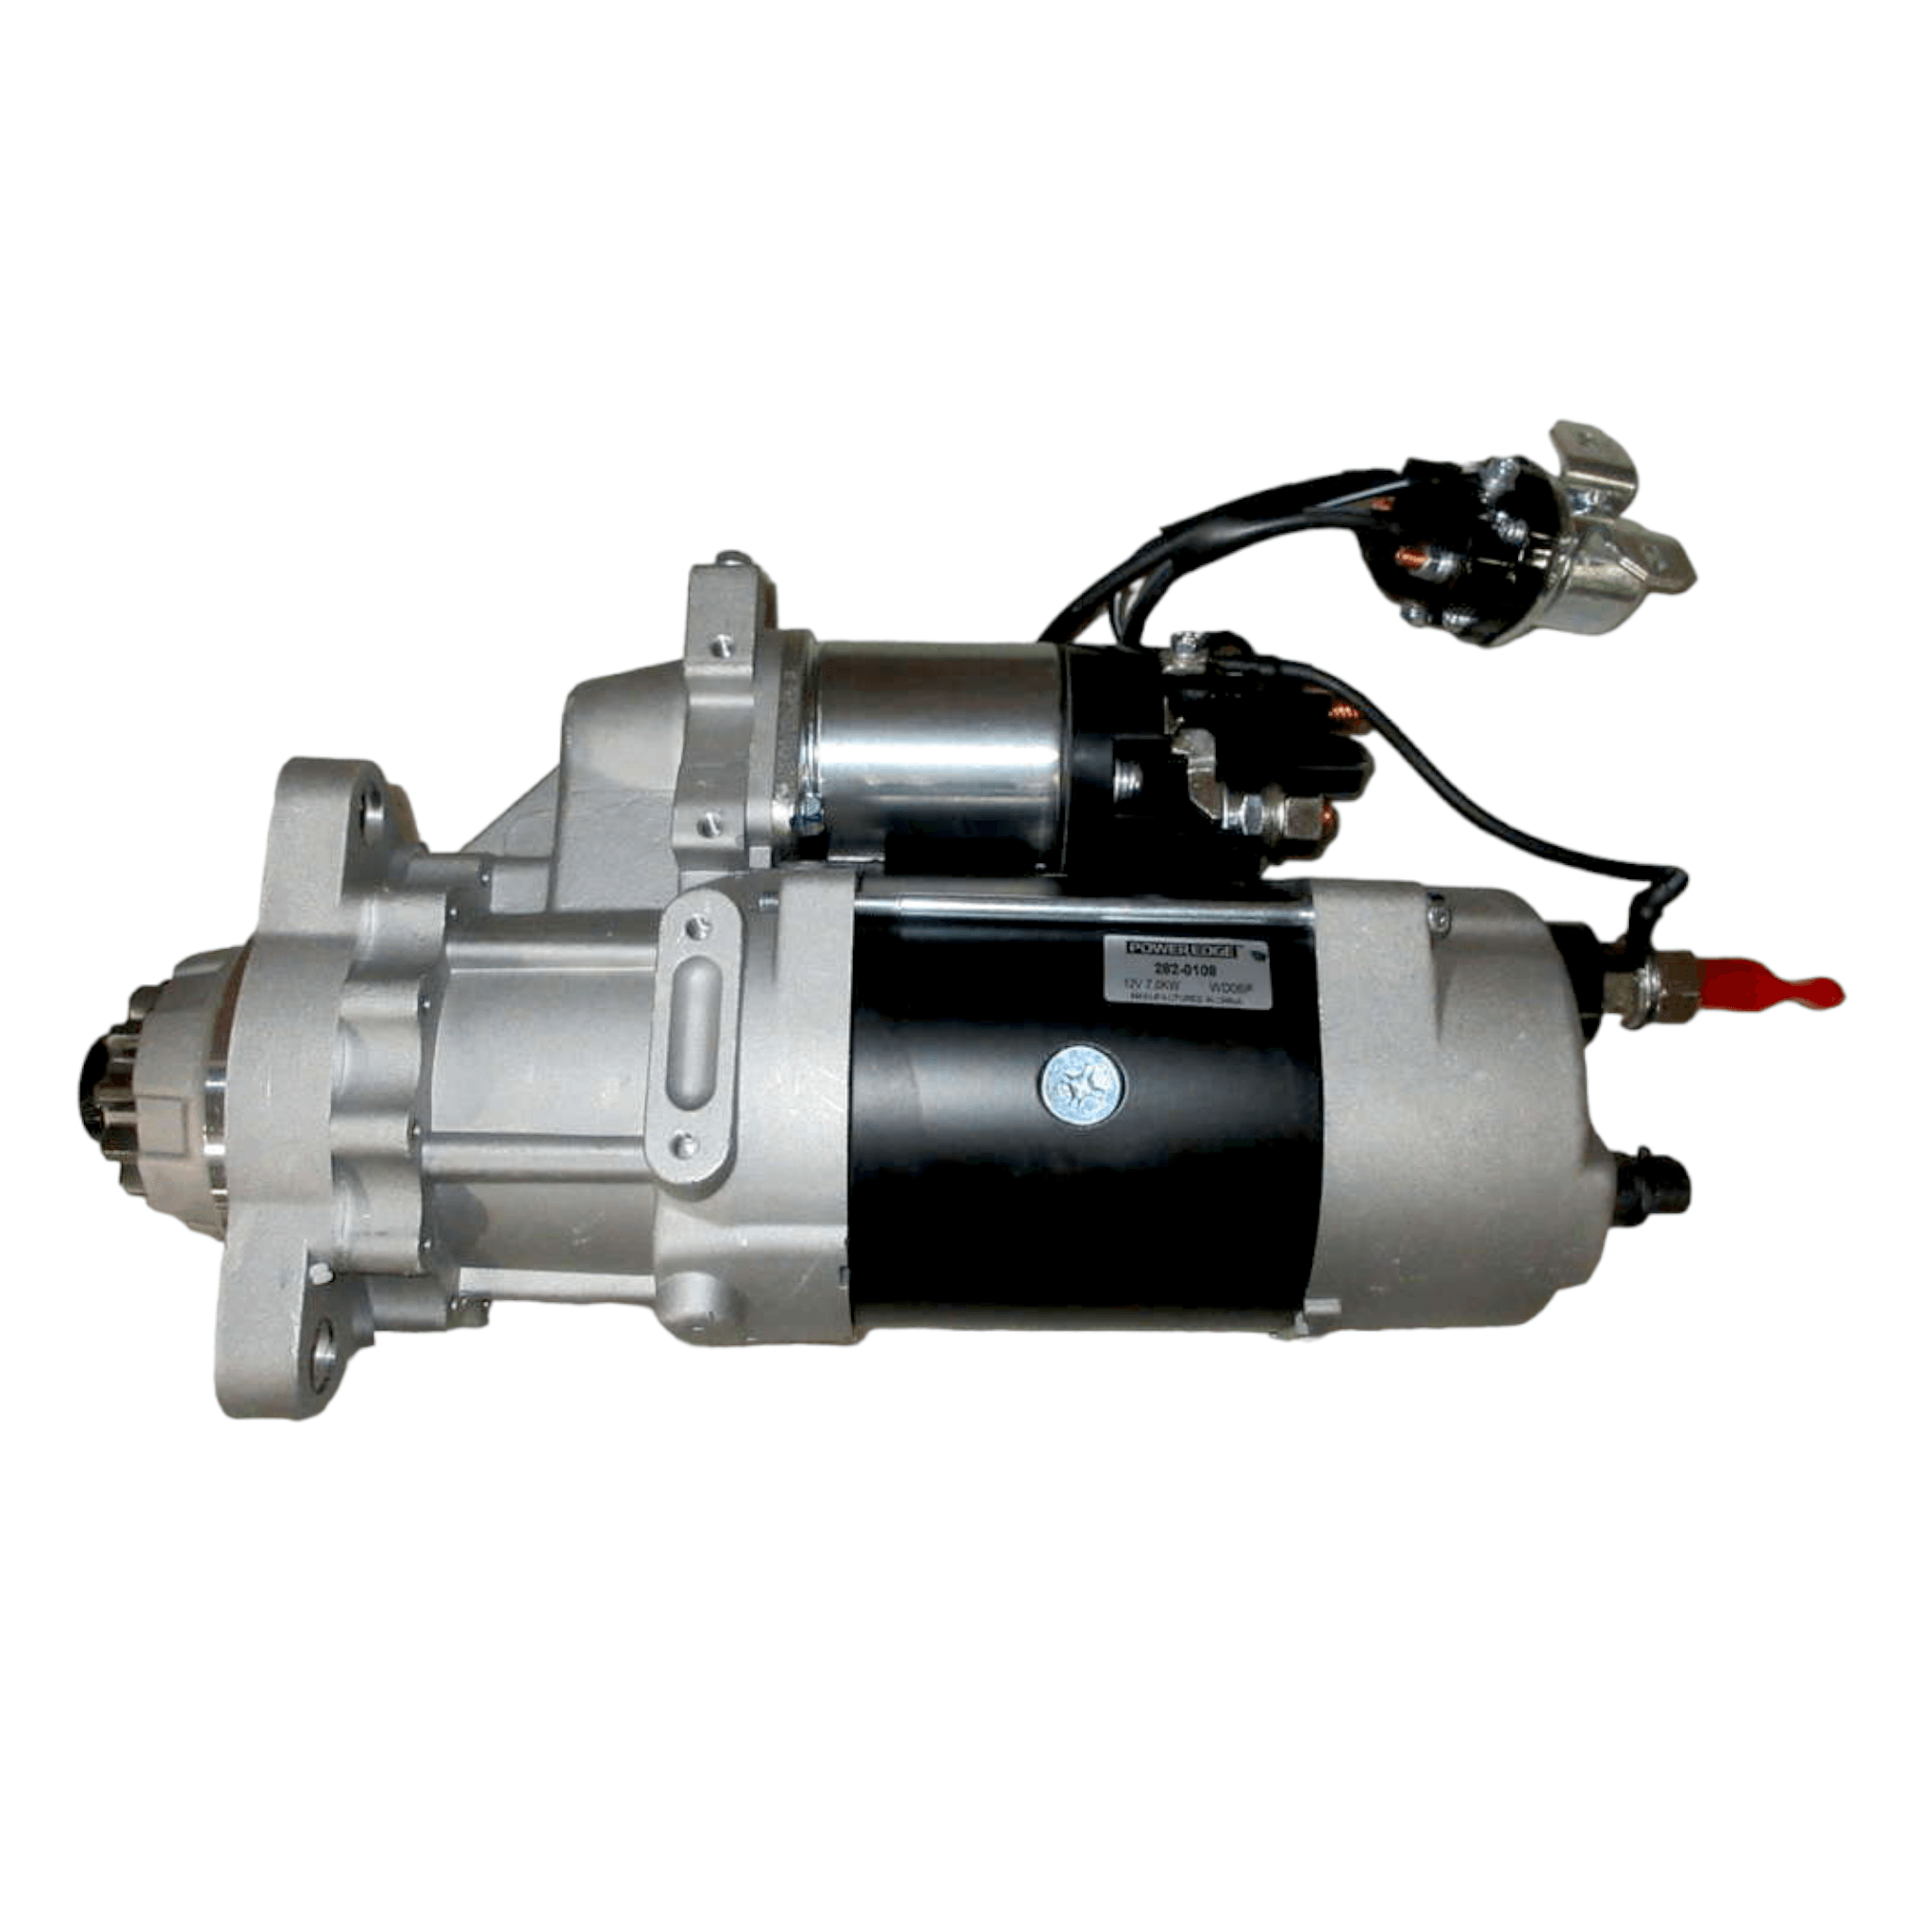 282-0108 Denso® Power Edge Electrical Starter Motor 39Mt 12V Commercial - ADVANCED TRUCK PARTS